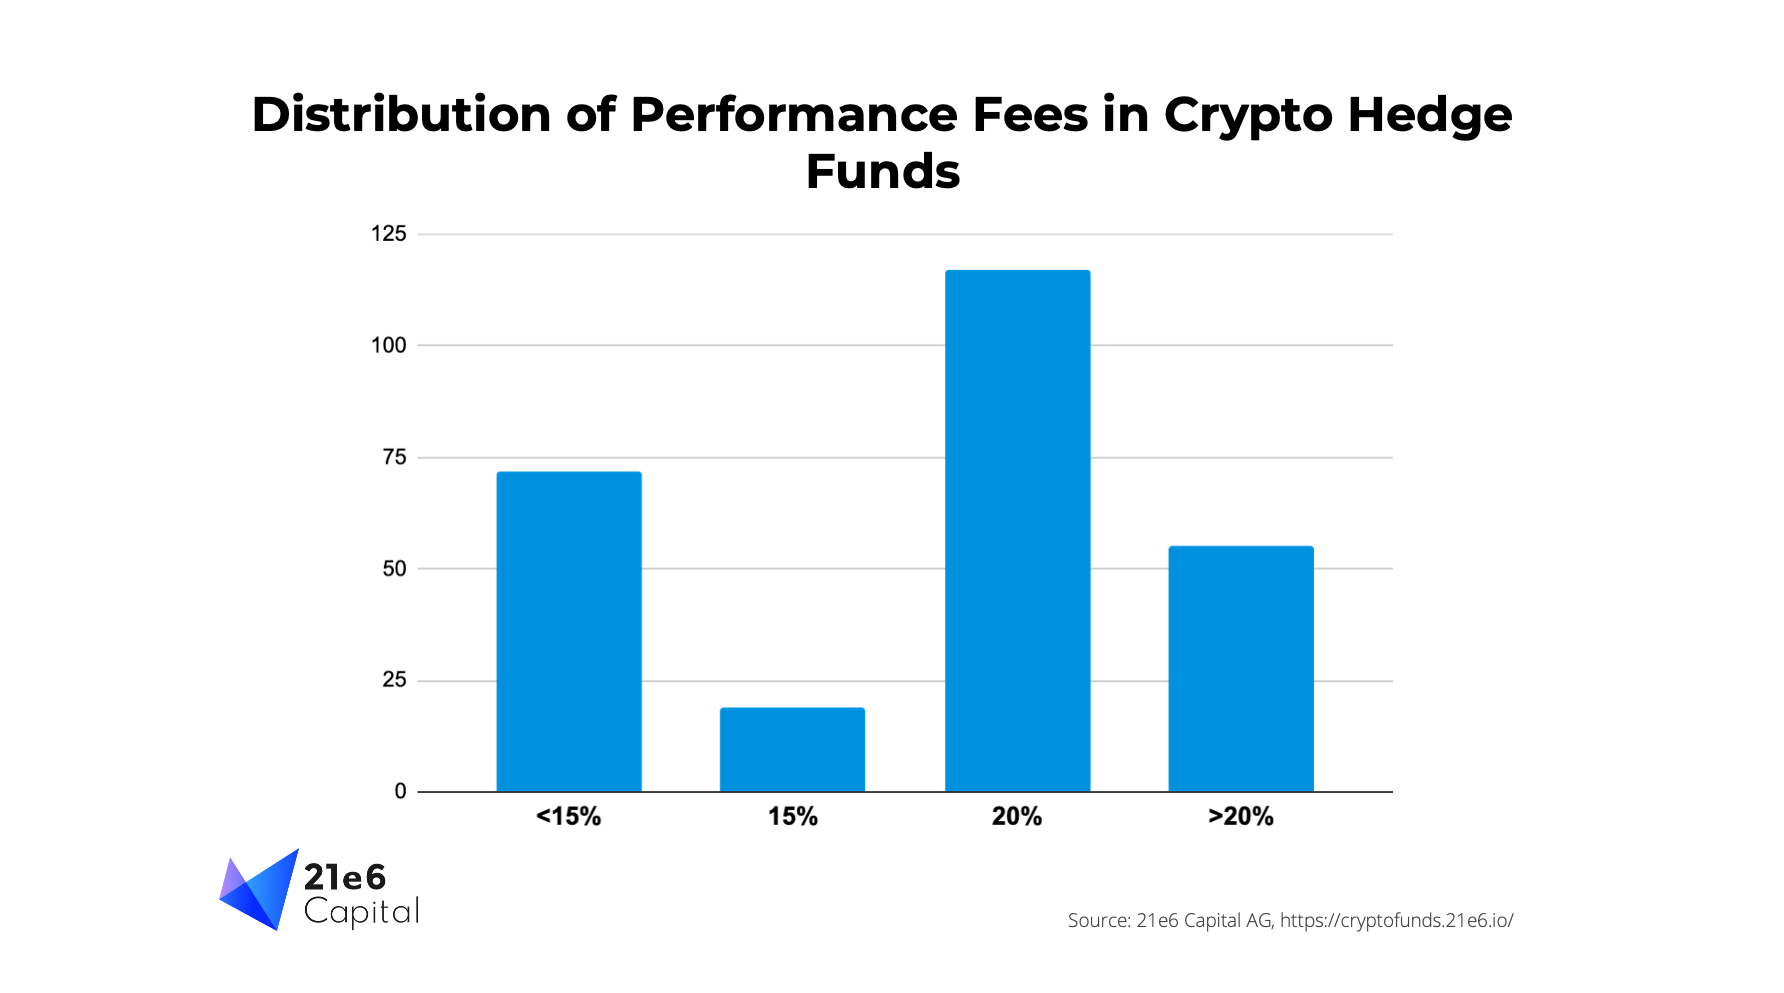 Distribution of performance fees in crypto hedge funds 